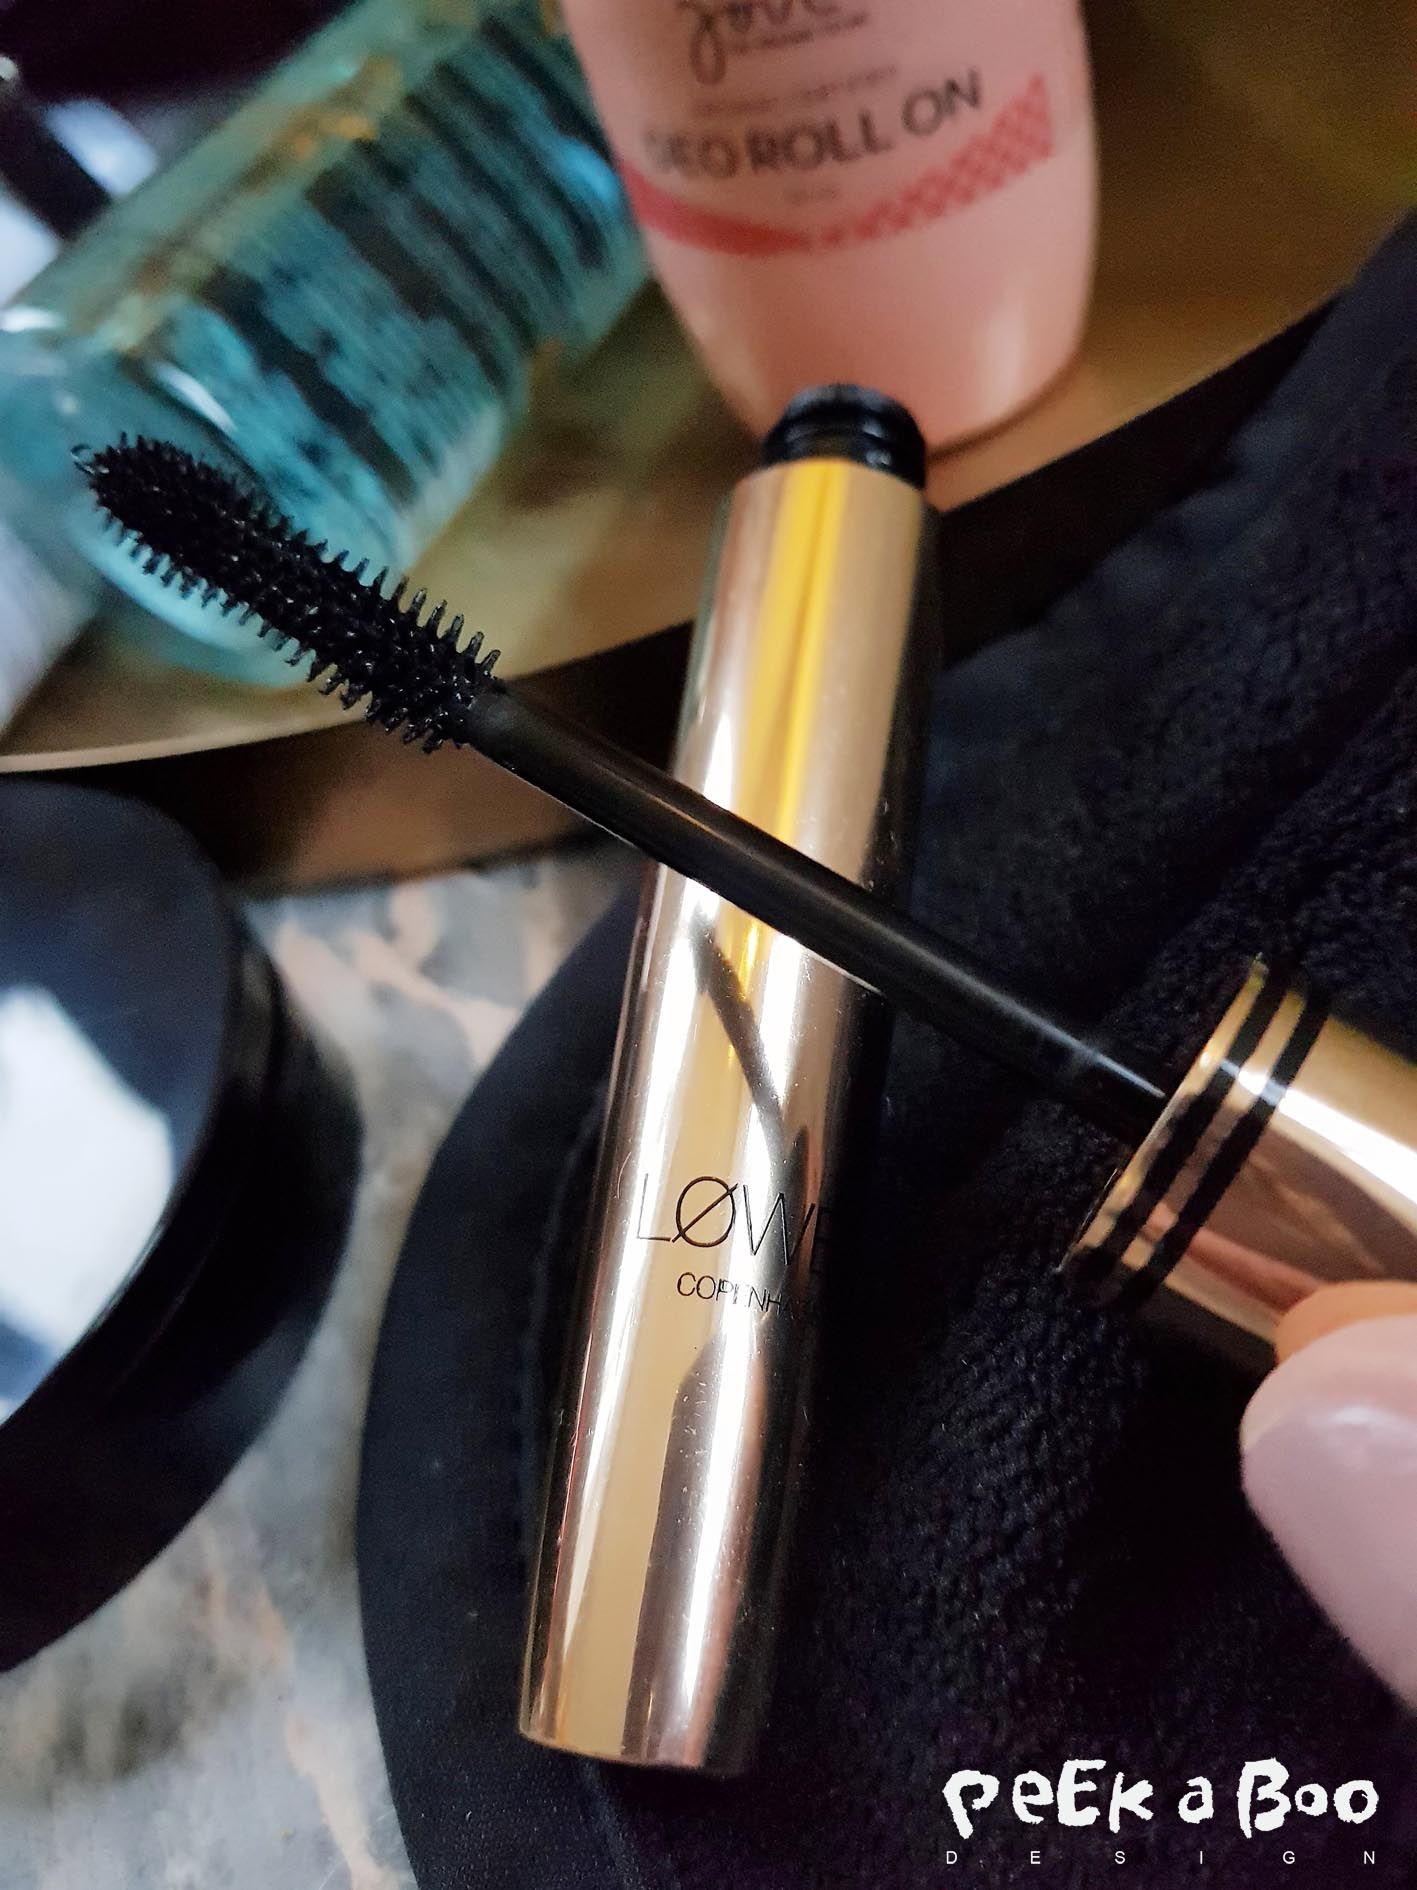 The Beyond mascara from Løwen it gives your eyelashes volume and a curly effect.